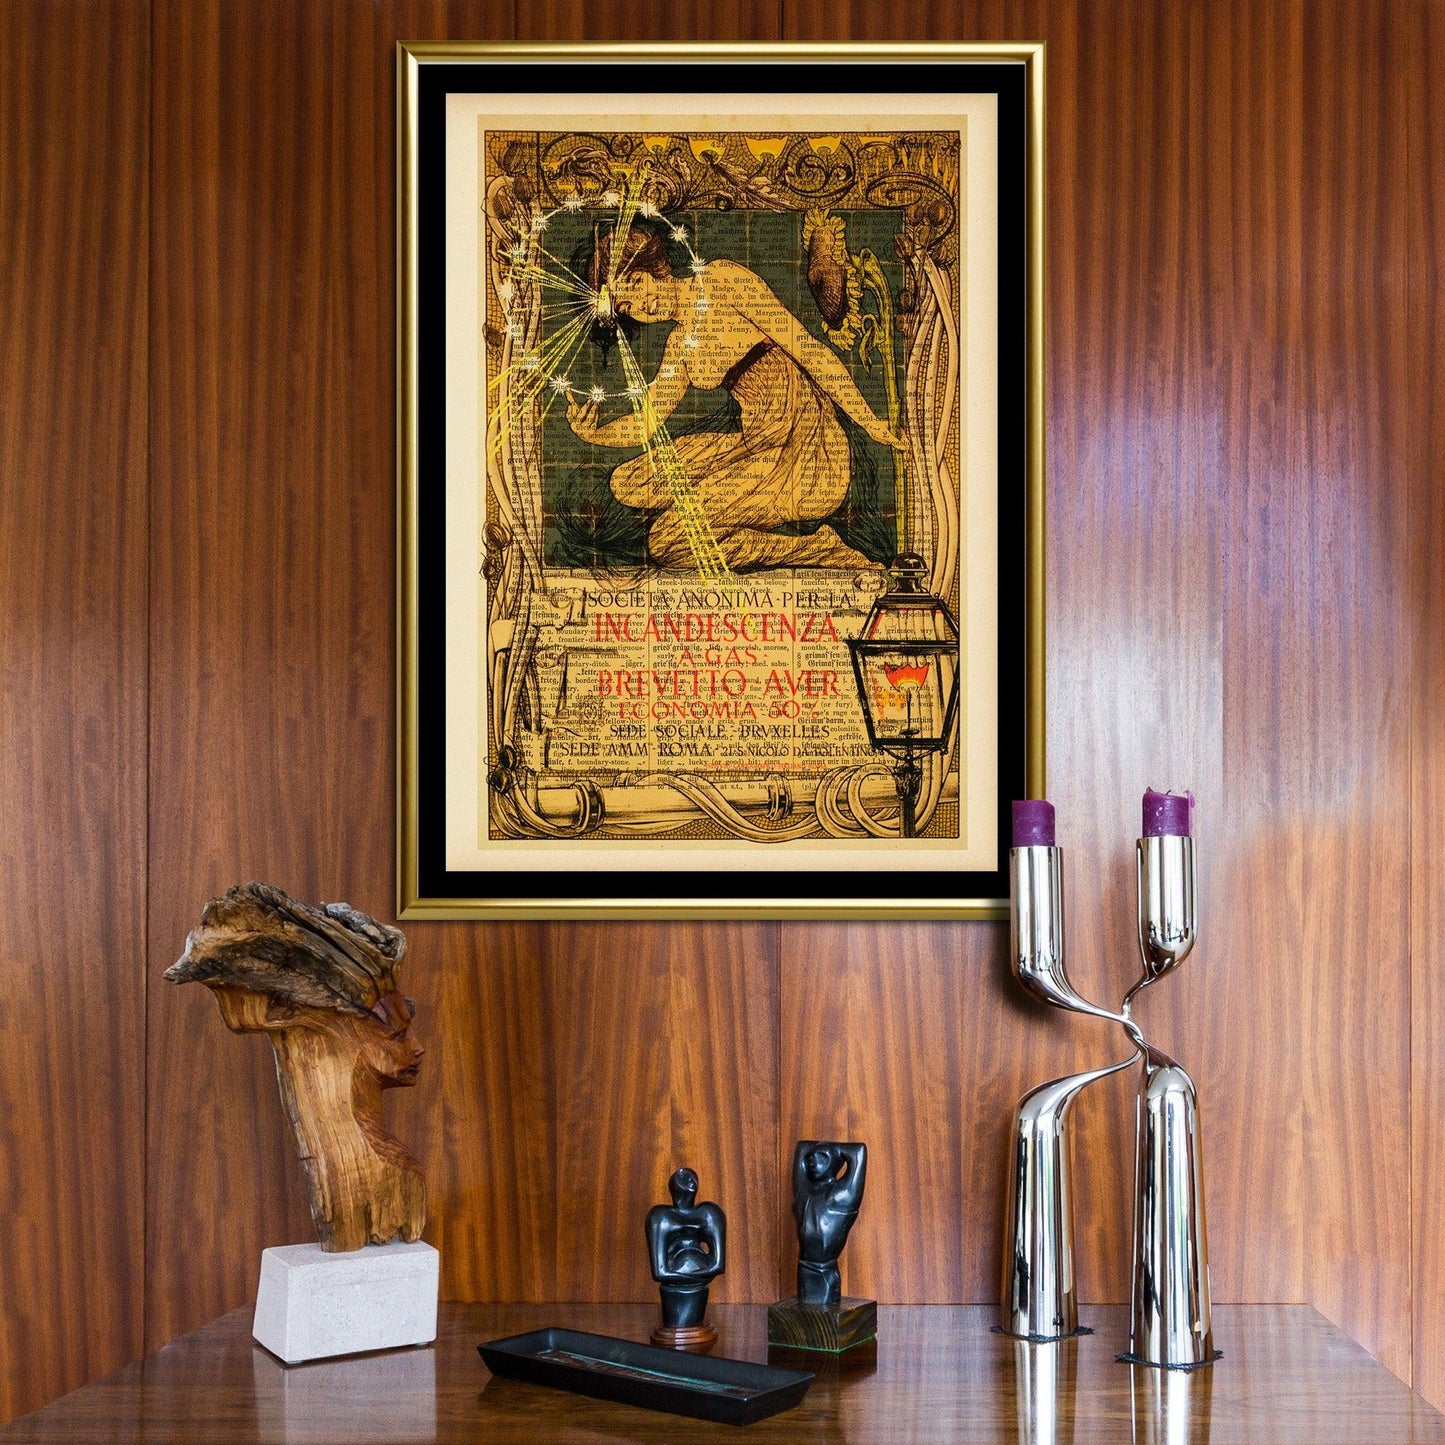 Give your home decor a touch of elegance through our exquisite Society For Gas Illumination reproduction poster. The artwork is a collage with the advertisements poster by Grasset created by Giovanni Maria Mataloni (Italian graphic designer, 1869-1944). The year of creation is 1895.